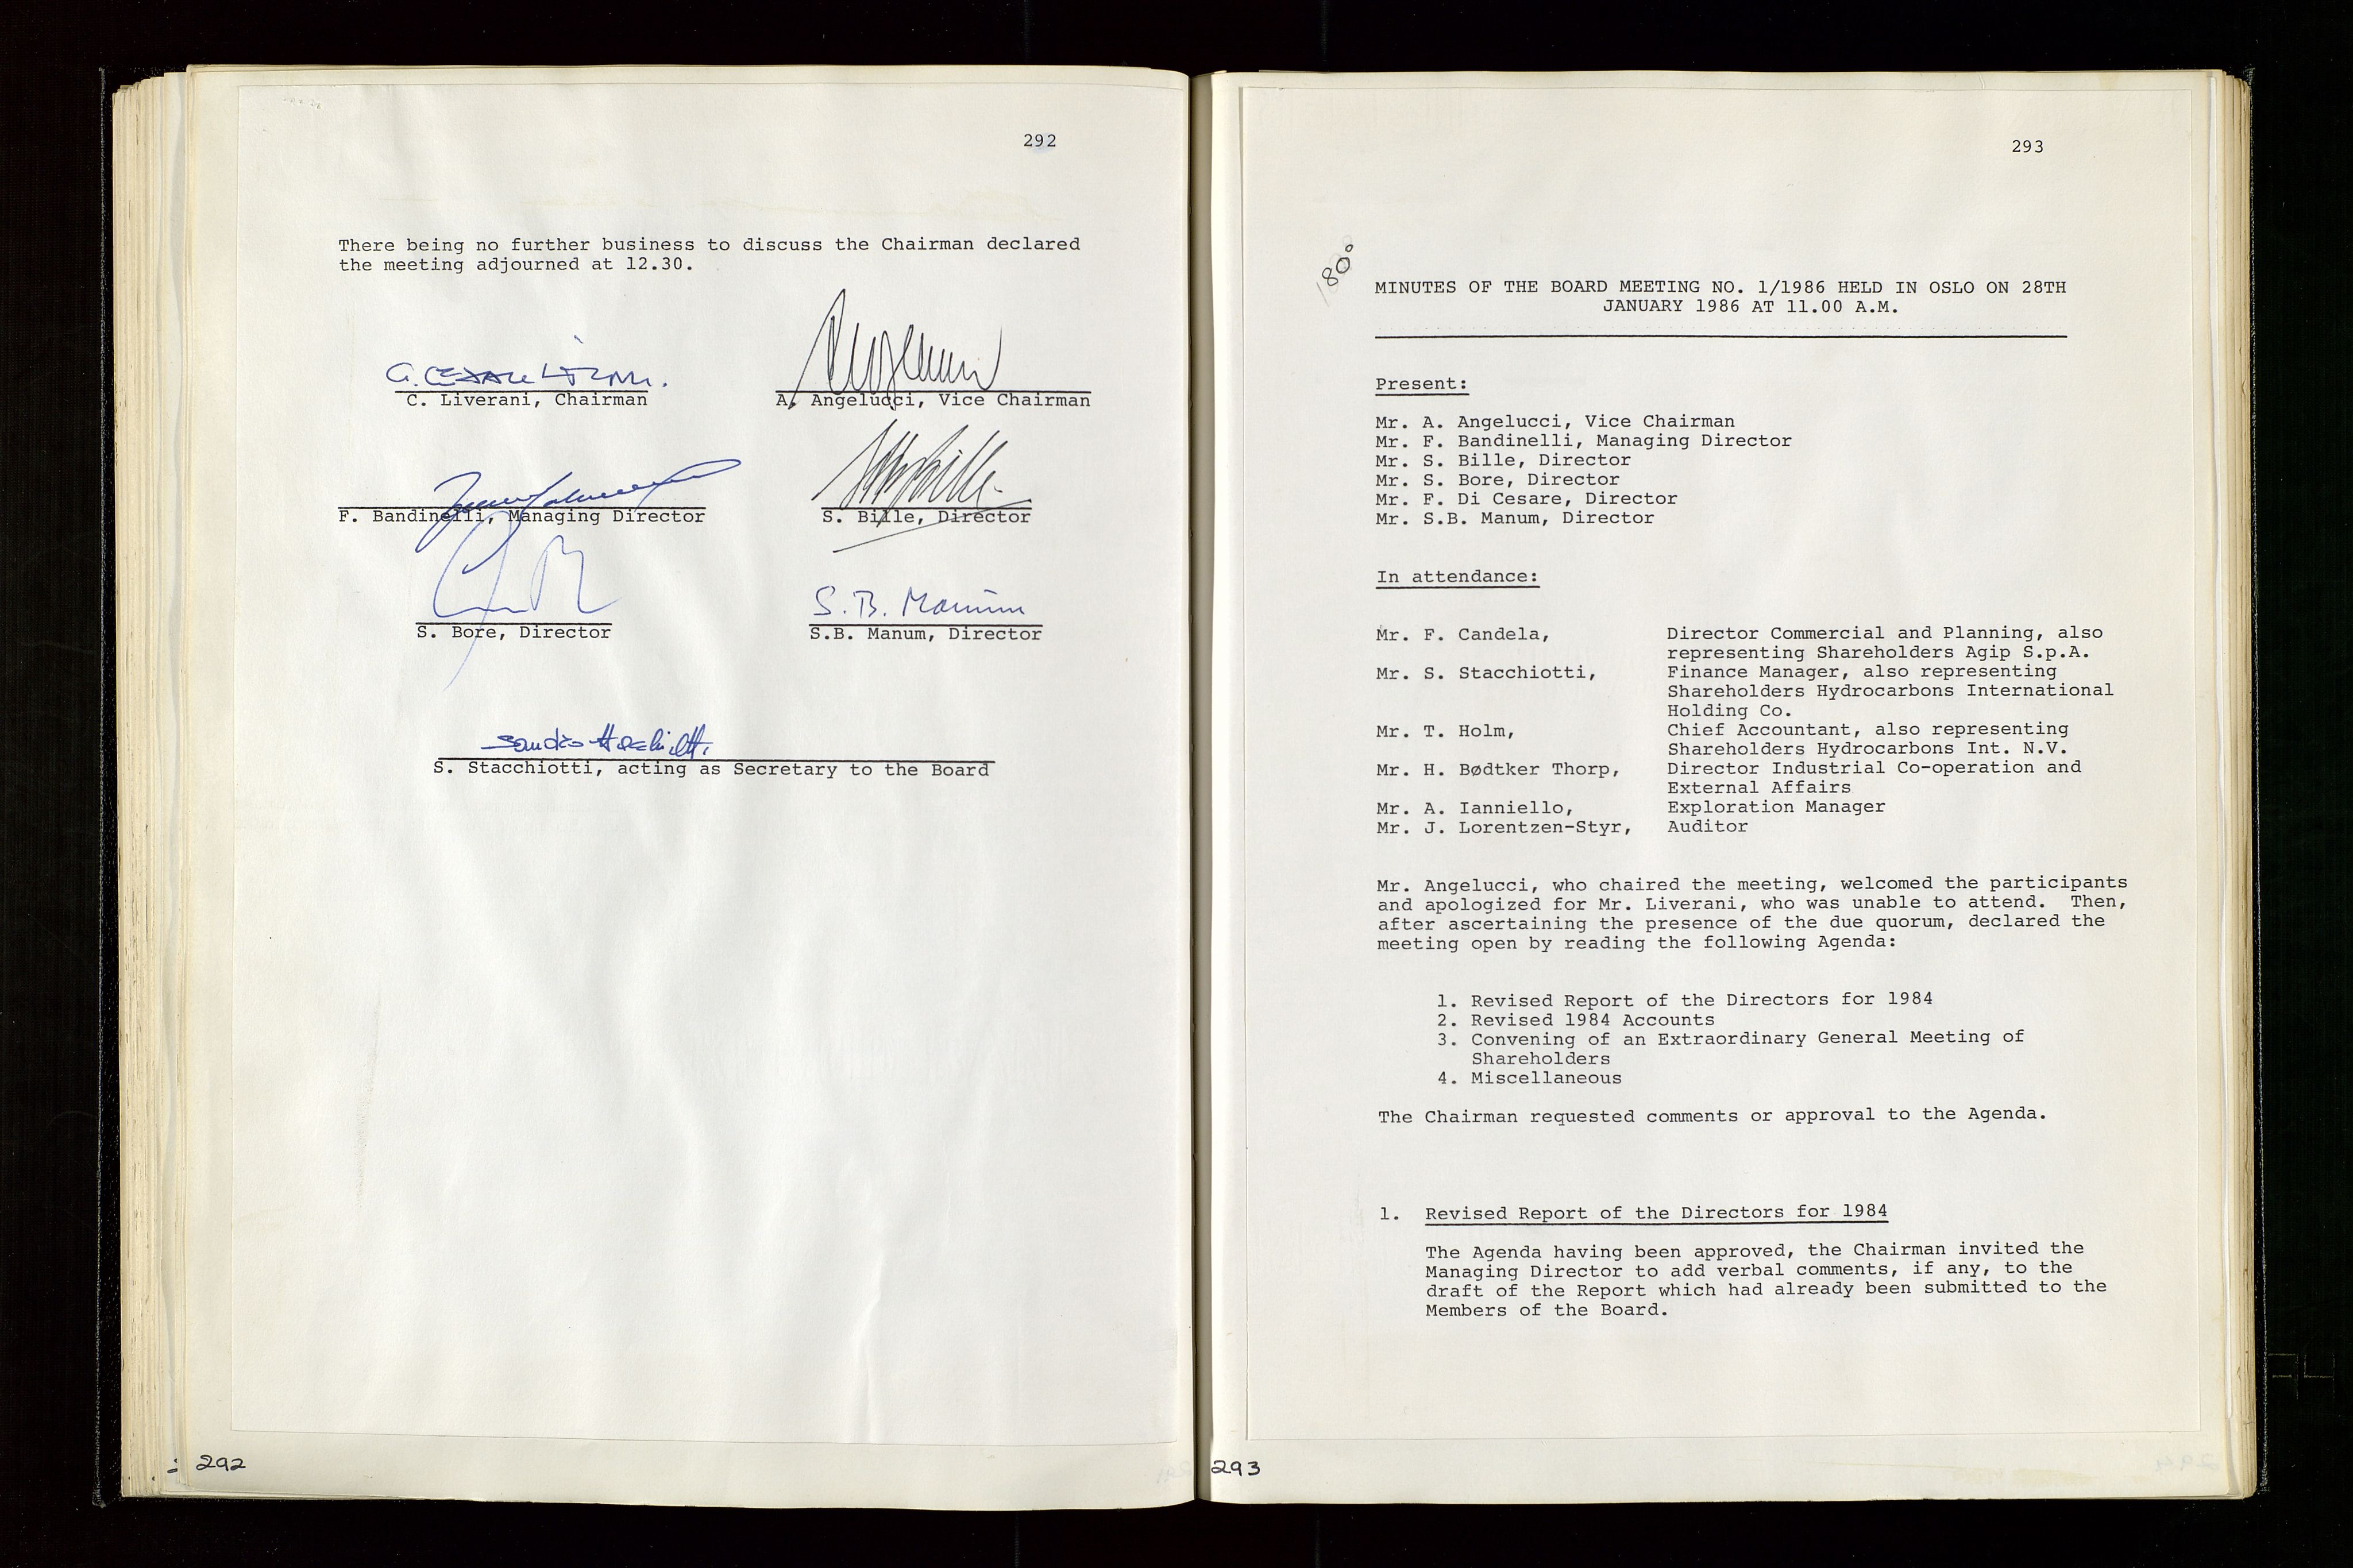 Pa 1583 - Norsk Agip AS, SAST/A-102138/A/Aa/L0003: Board of Directors meeting minutes, 1979-1983, s. 292-293